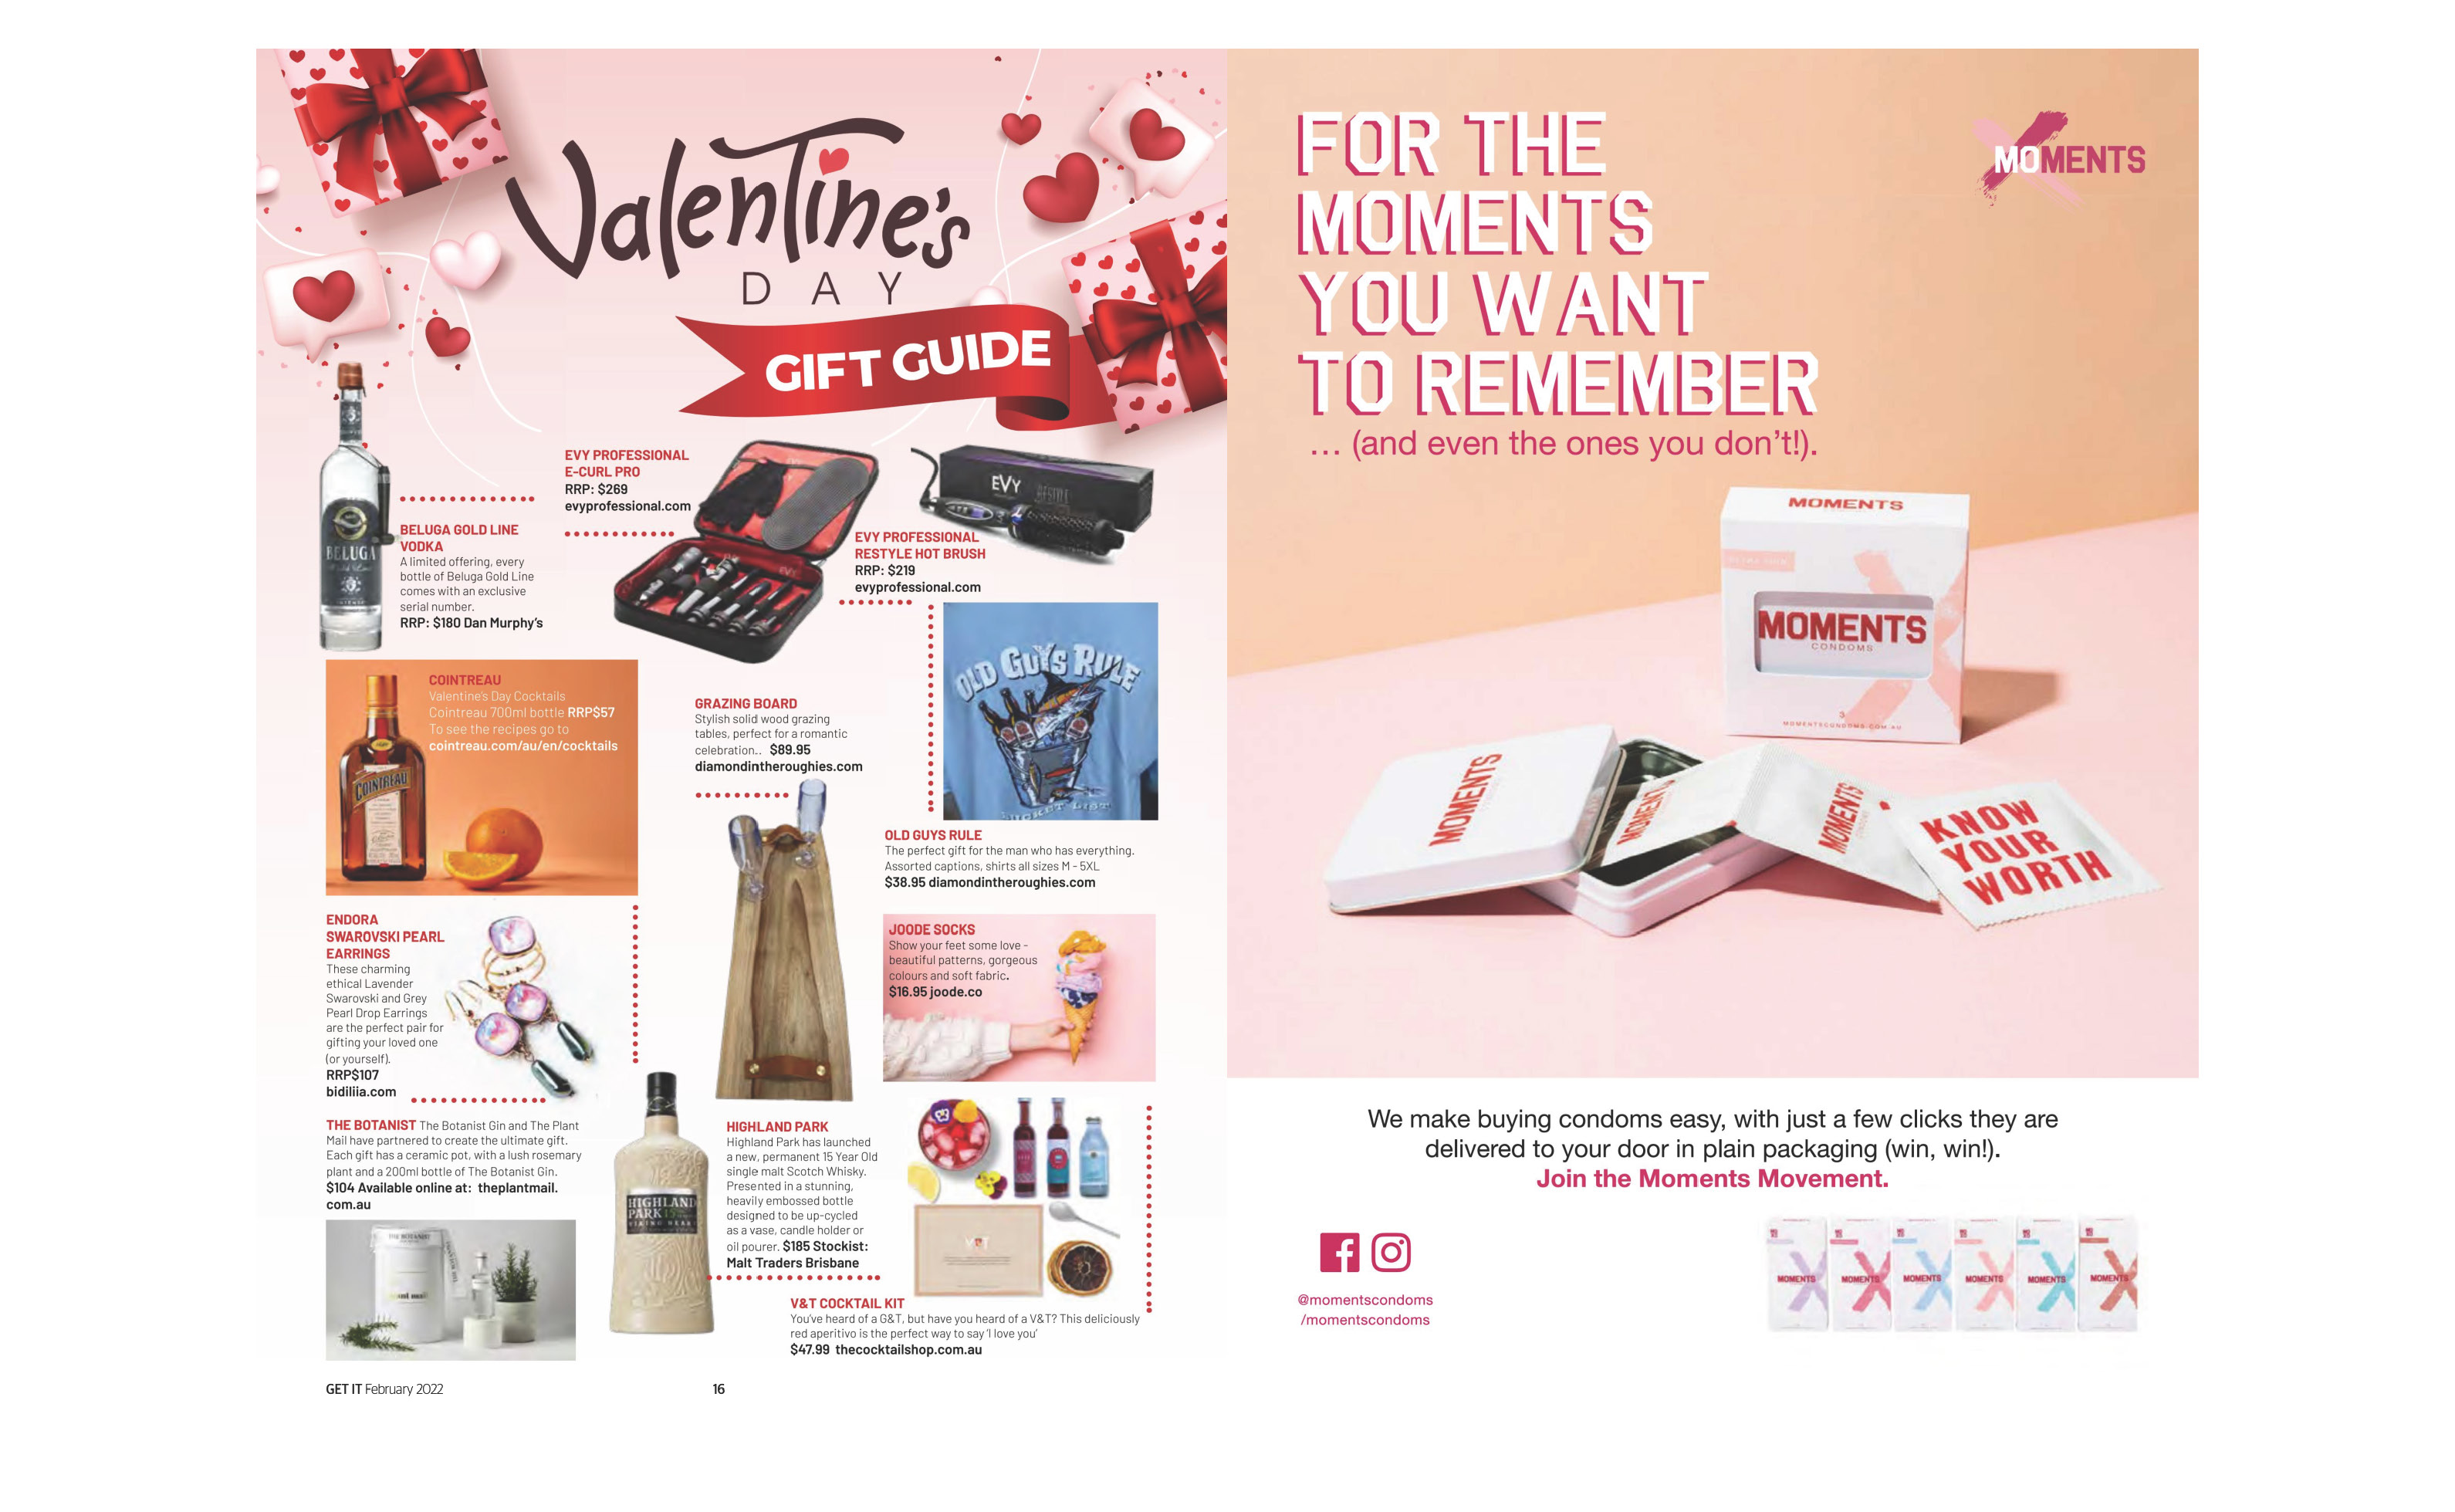 Get the E-CURL PRO this Valentine's Day 2